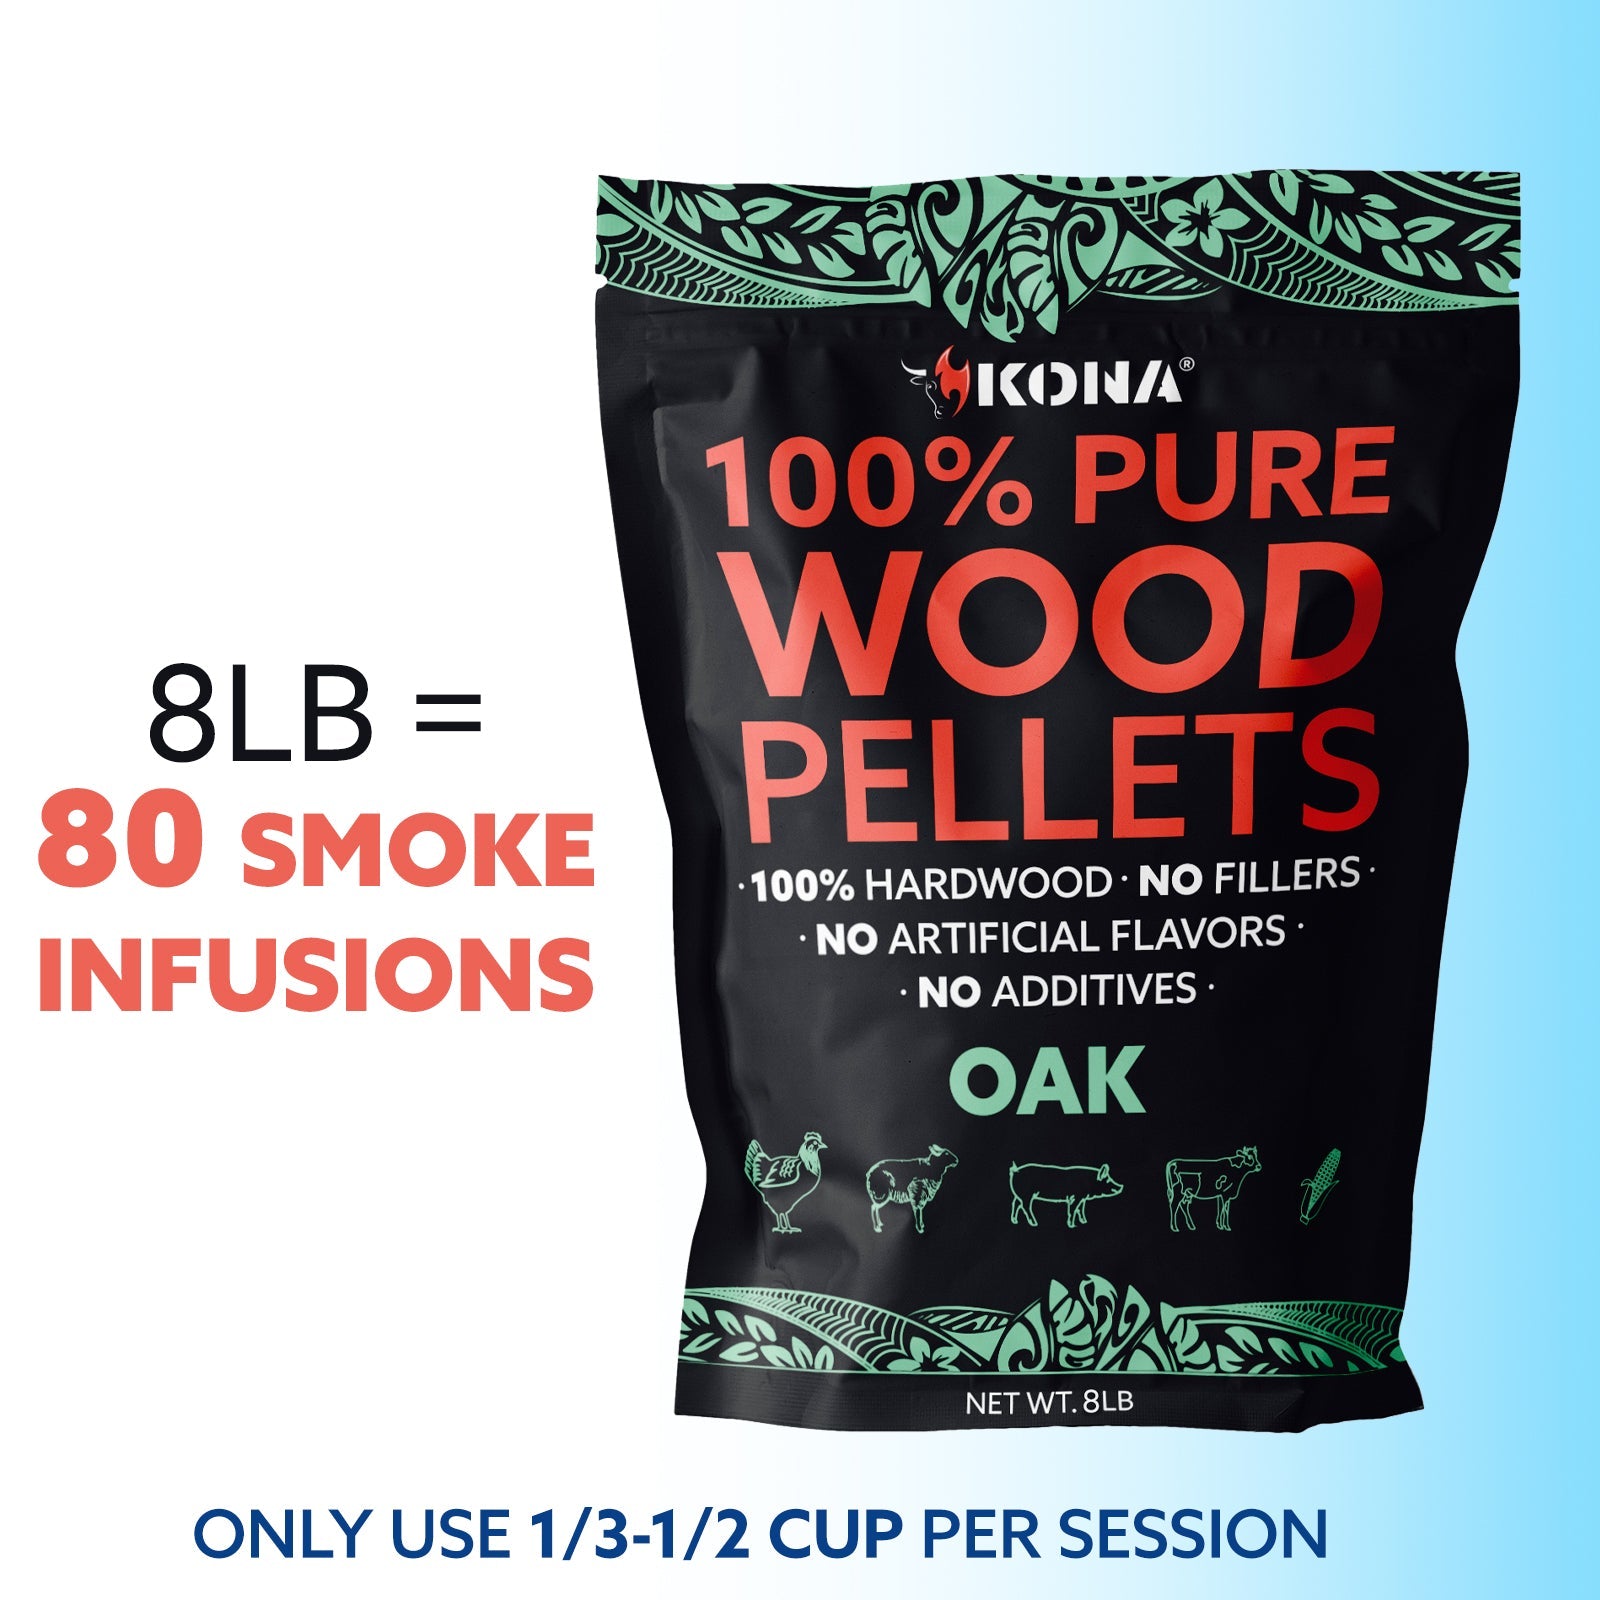 Kona 100% Oak Wood Pellets - Grilling, BBQ & Smoking - Concentrated Pure Hardwood - Mellow Smoke - The Tool Store